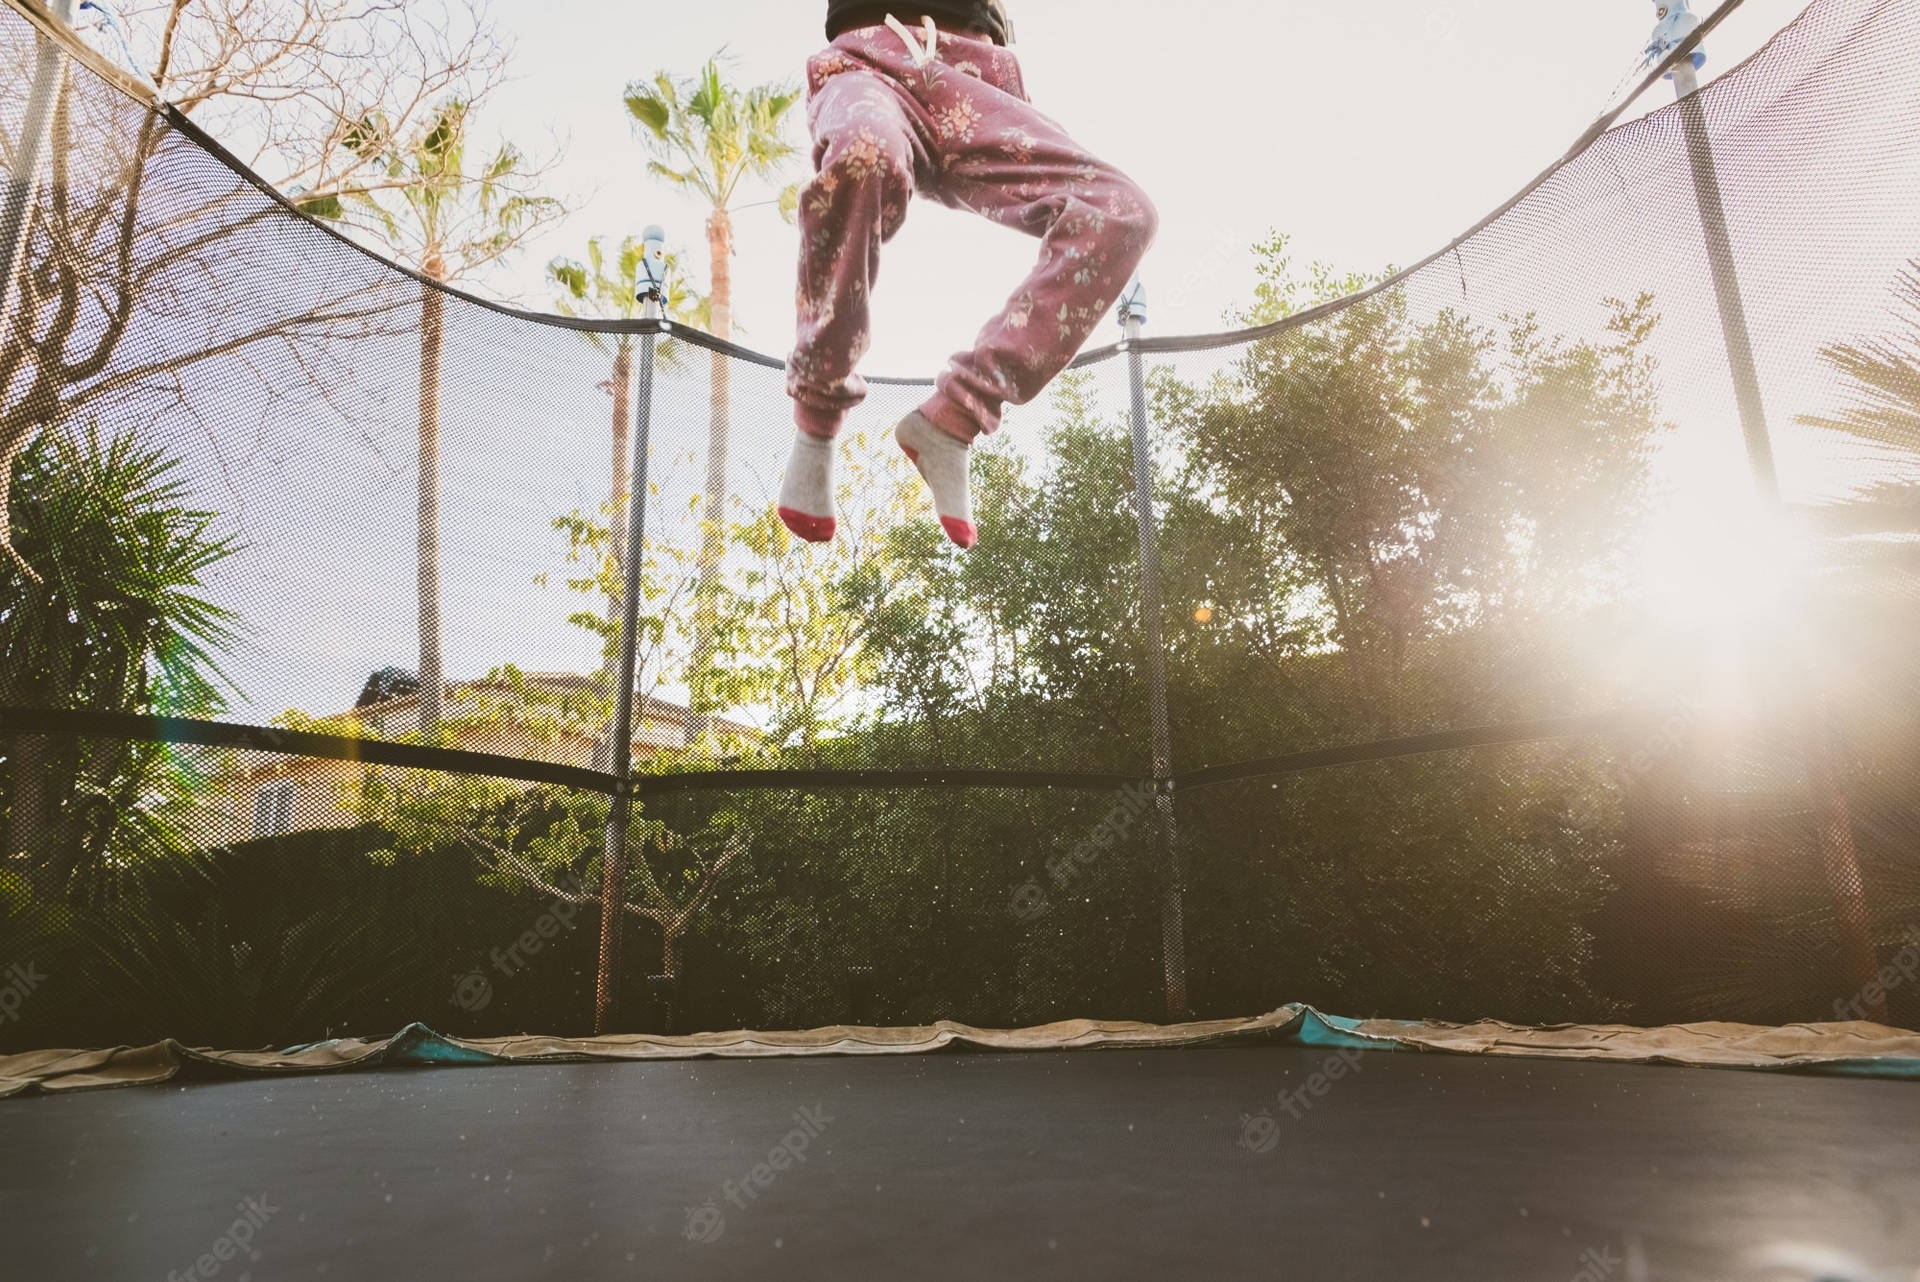 A man finds joy in mid-air while jumping on a trampoline Wallpaper